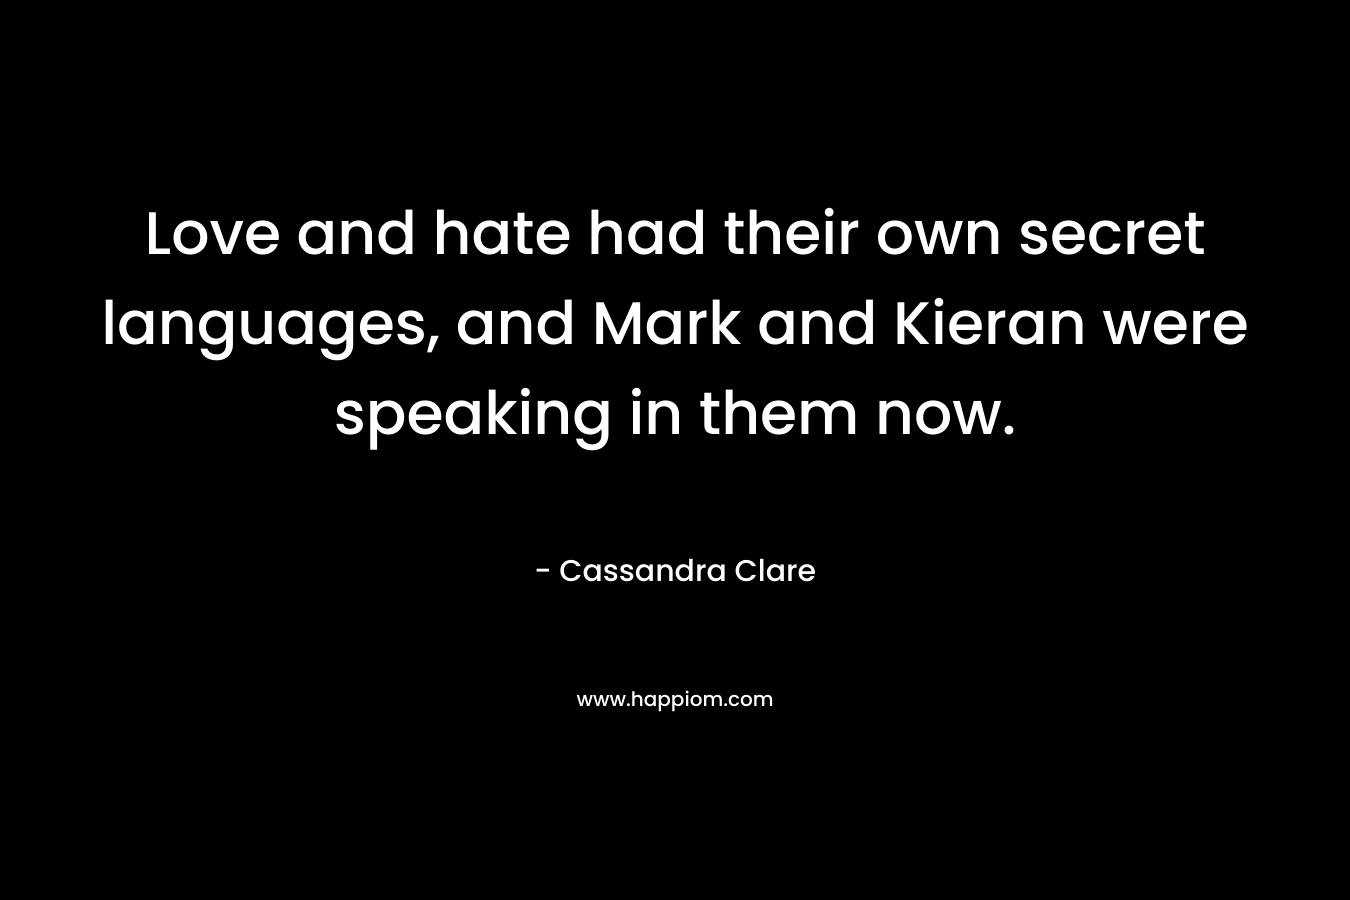 Love and hate had their own secret languages, and Mark and Kieran were speaking in them now. – Cassandra Clare